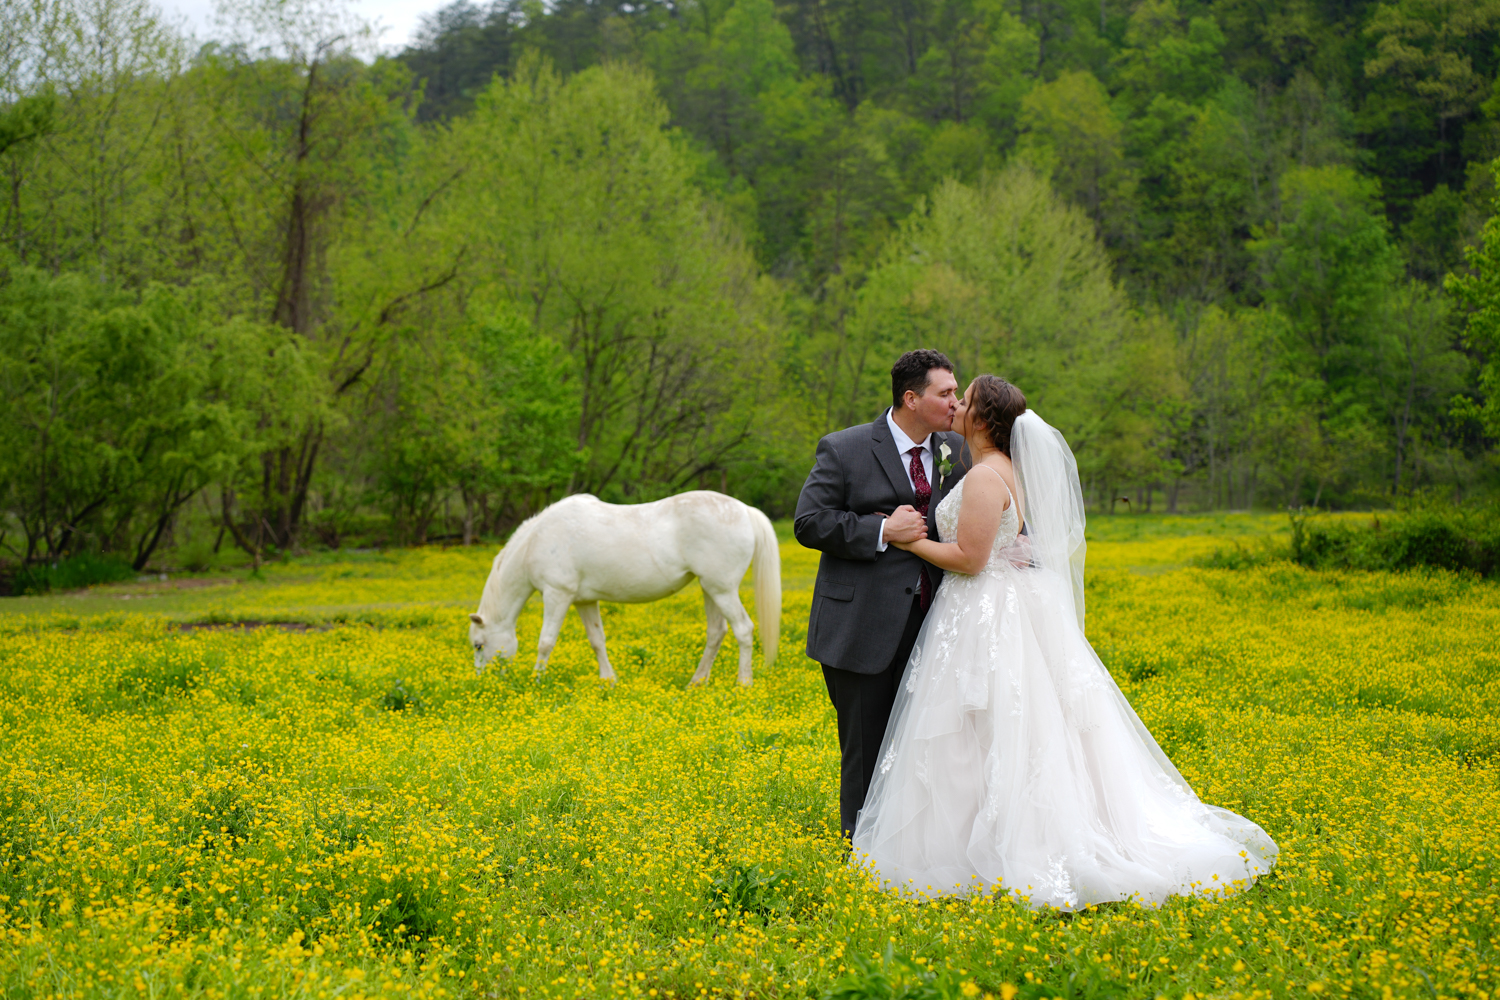 Wedding couple kissing in a field of yellow buttercups with a white appaloosa horse grazing in the background at the Honeysuckle Hills wedding venue in Pigeon Forge